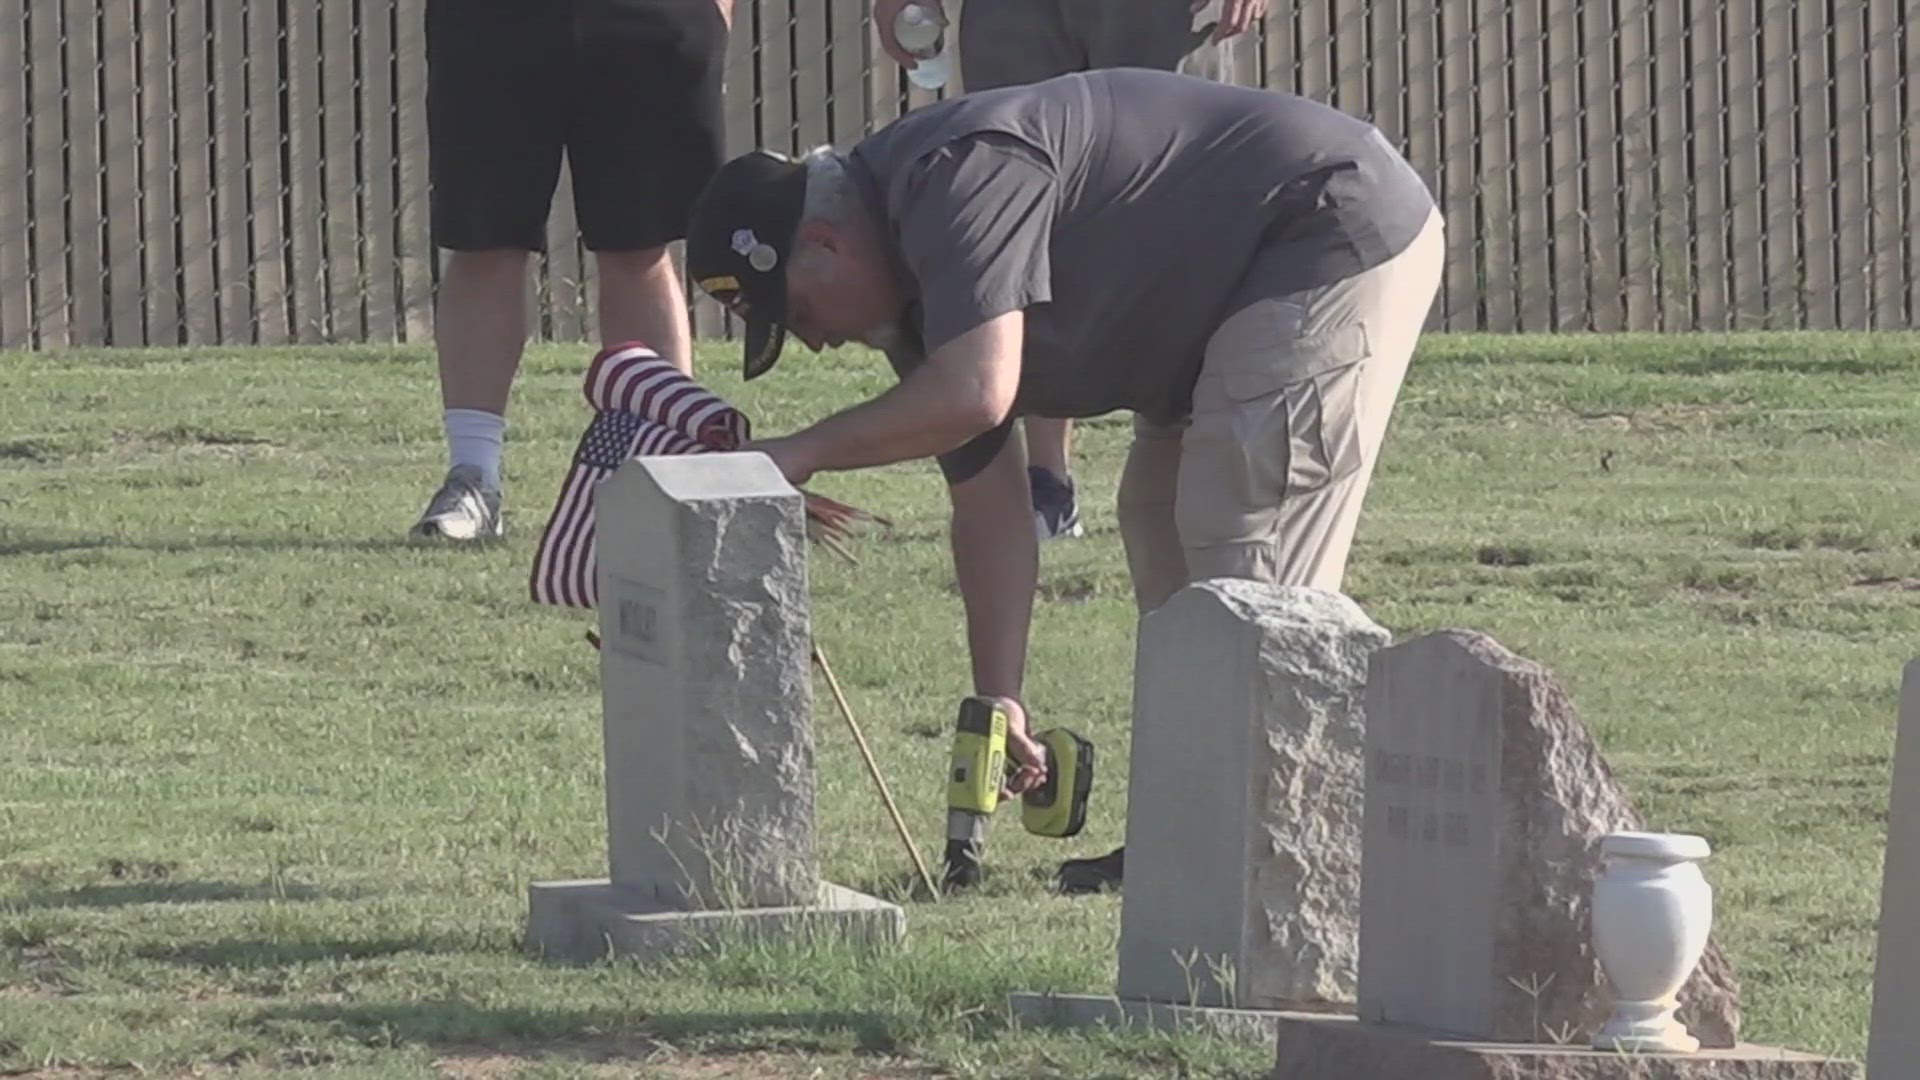 The VFW placed flags at the graves of veterans buried in Fairview Cemetary.